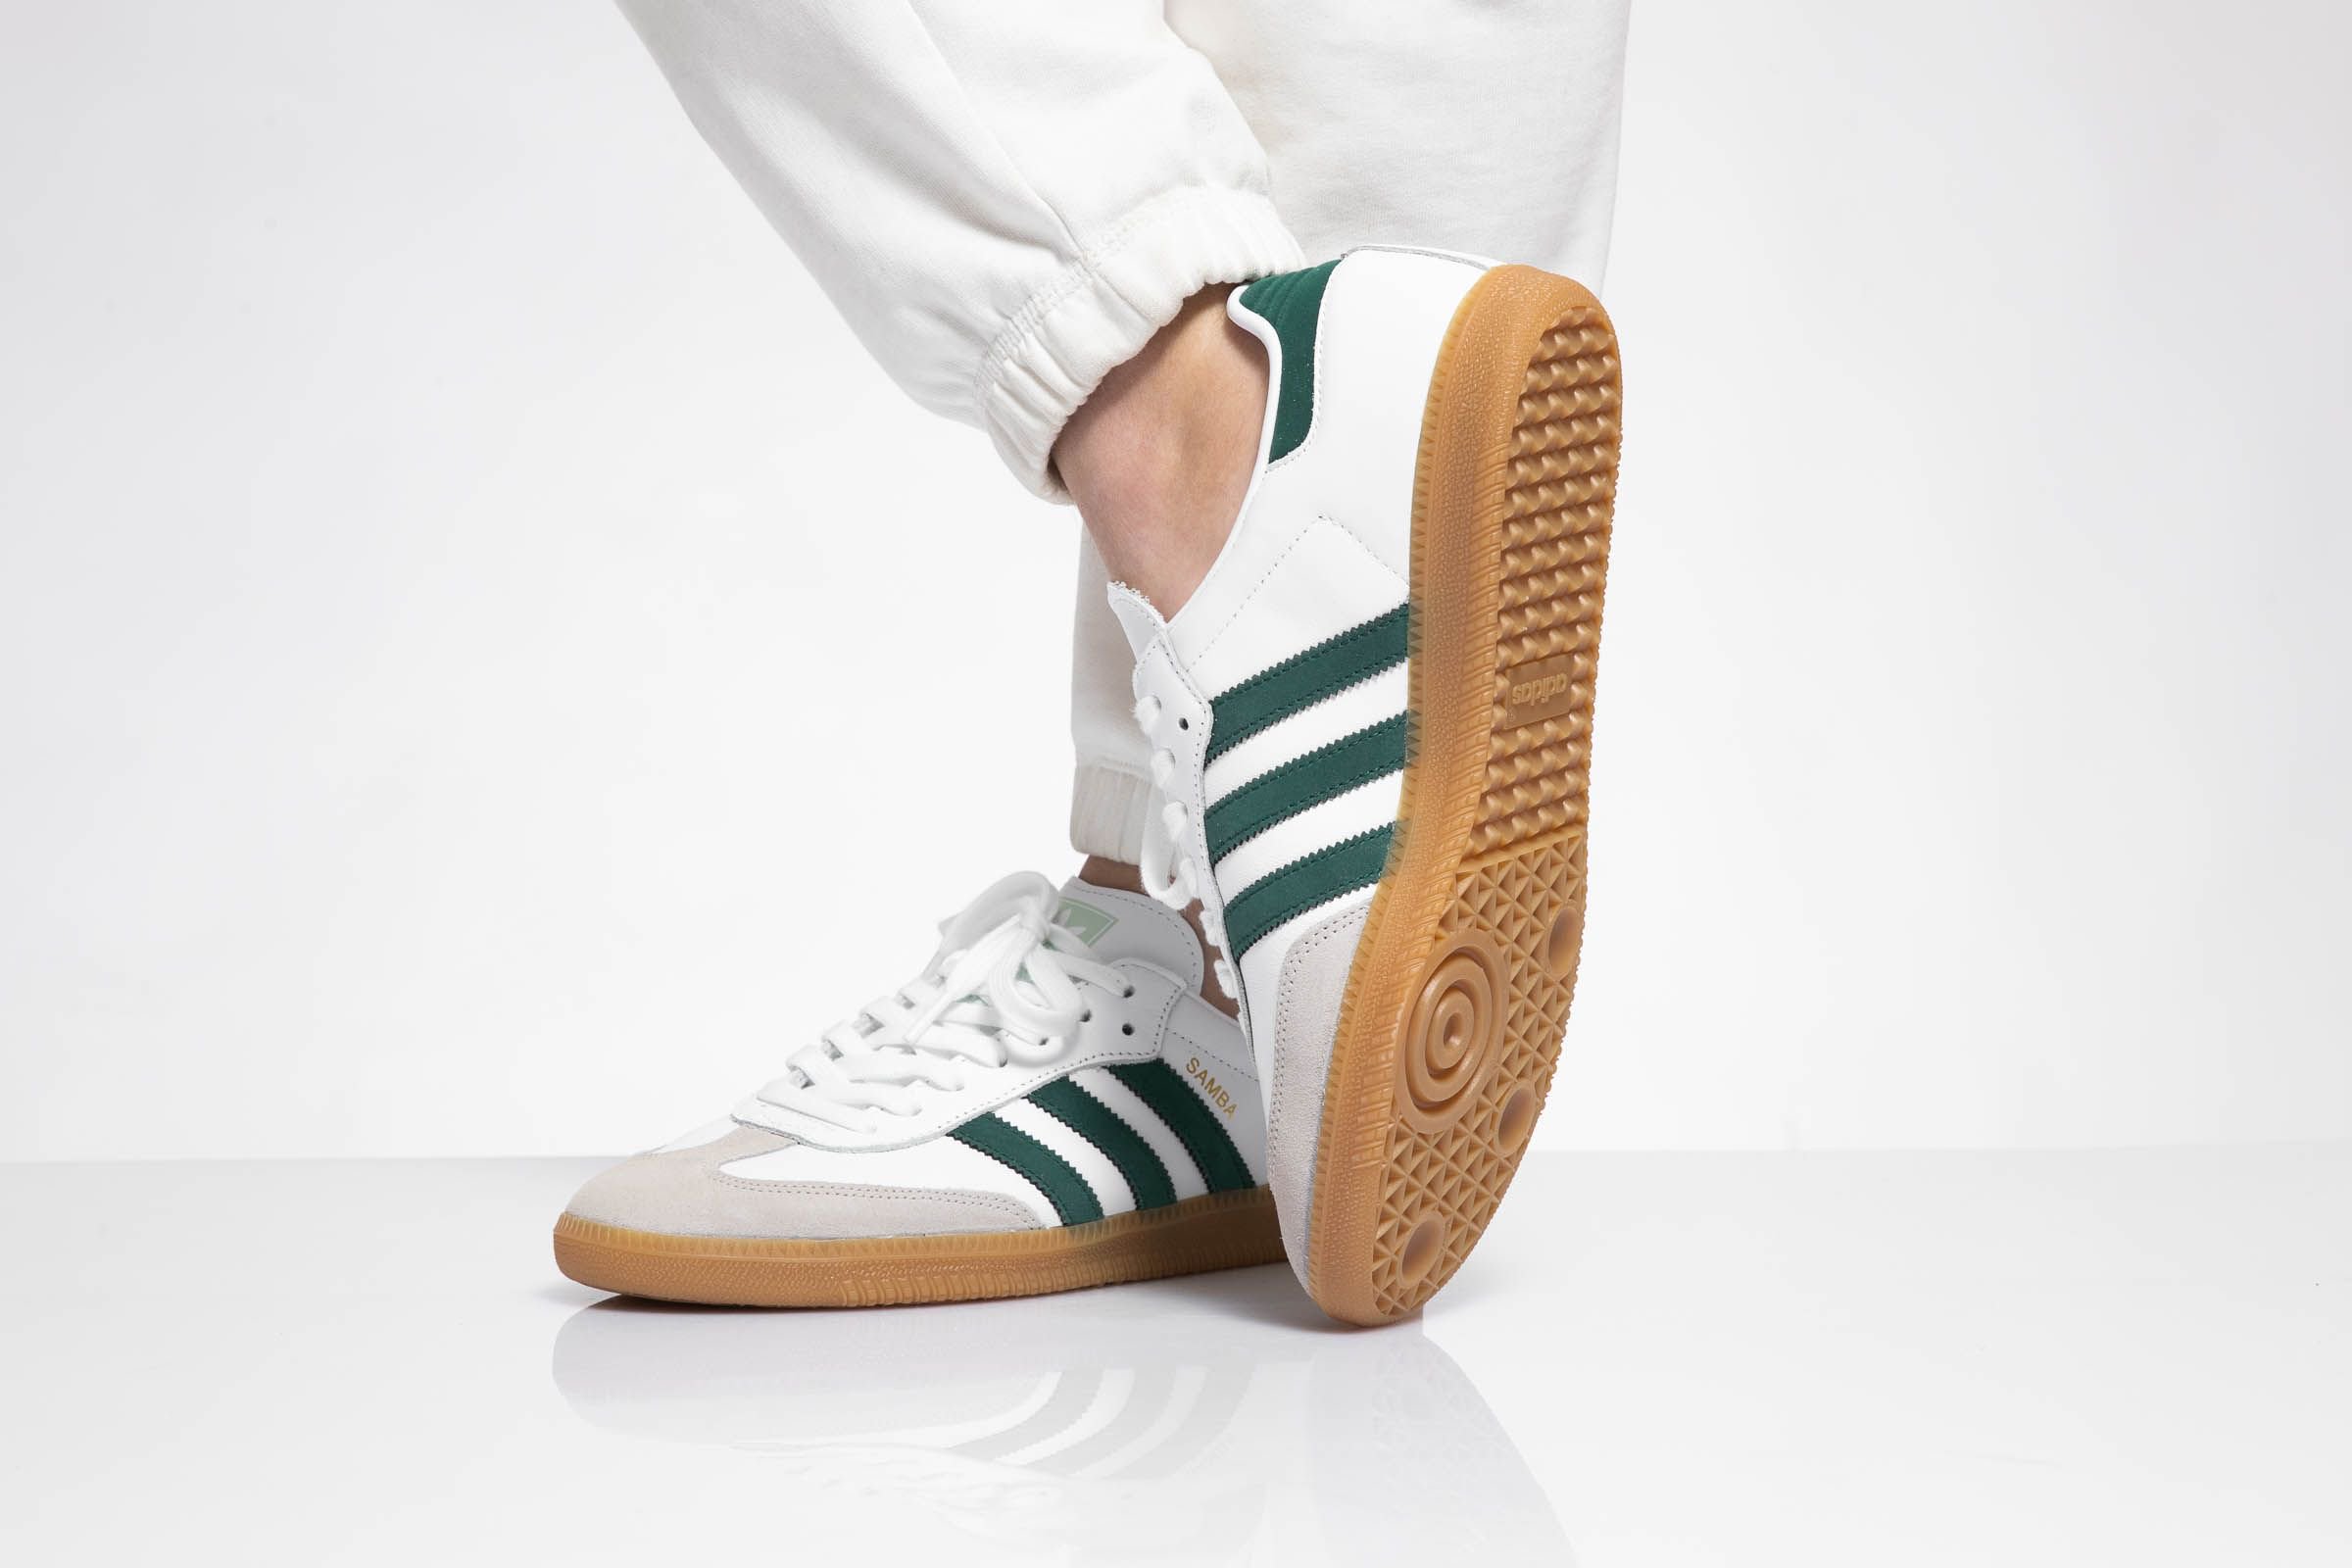 Folleto hoja infancia Titolo on Twitter: "Adidas Samba, the timeless icon returns. Back in the  days it was a popular soccer indoor shoe. ⁠ L I N K ➡️  https://t.co/HETKkNL04C UK 6.5 (40) - UK